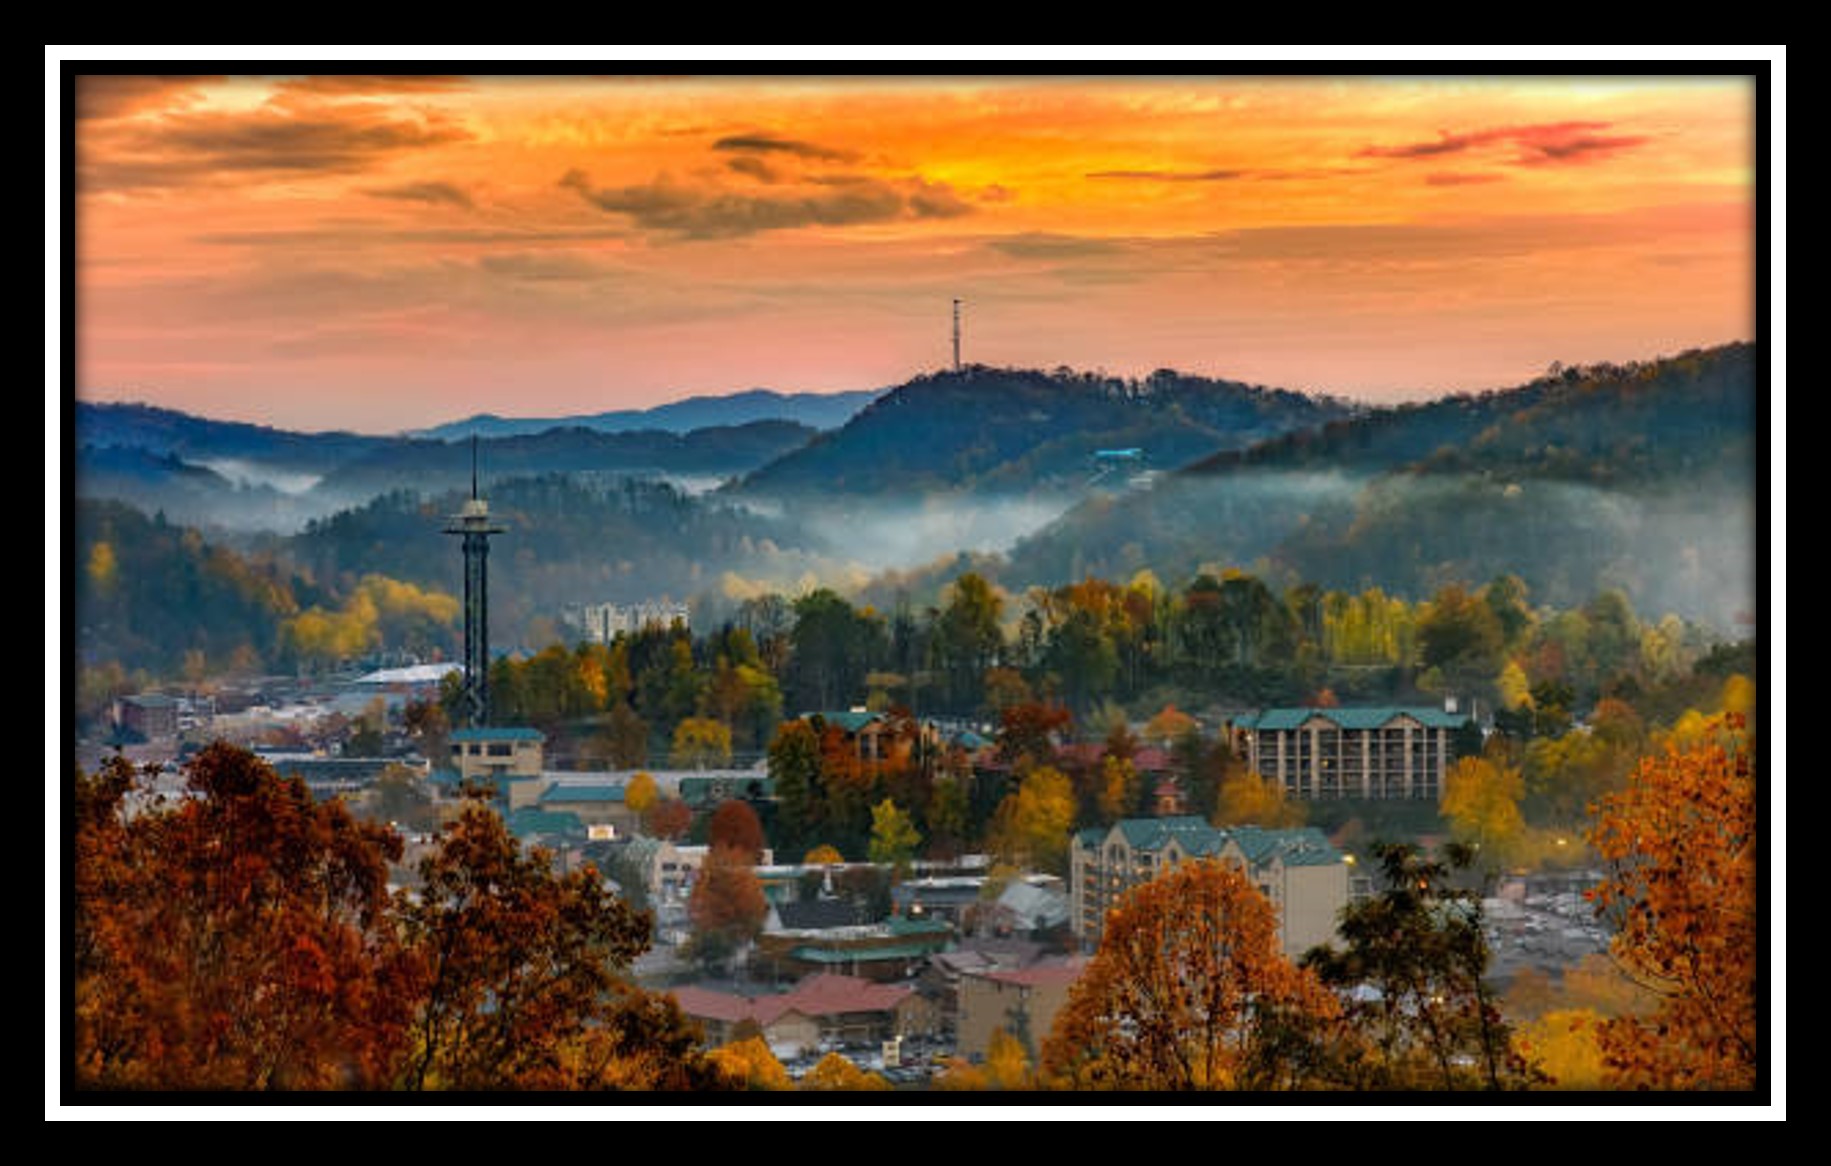 A picture showing Knoxville, Tennessee with the Smoky Mountains behind it.